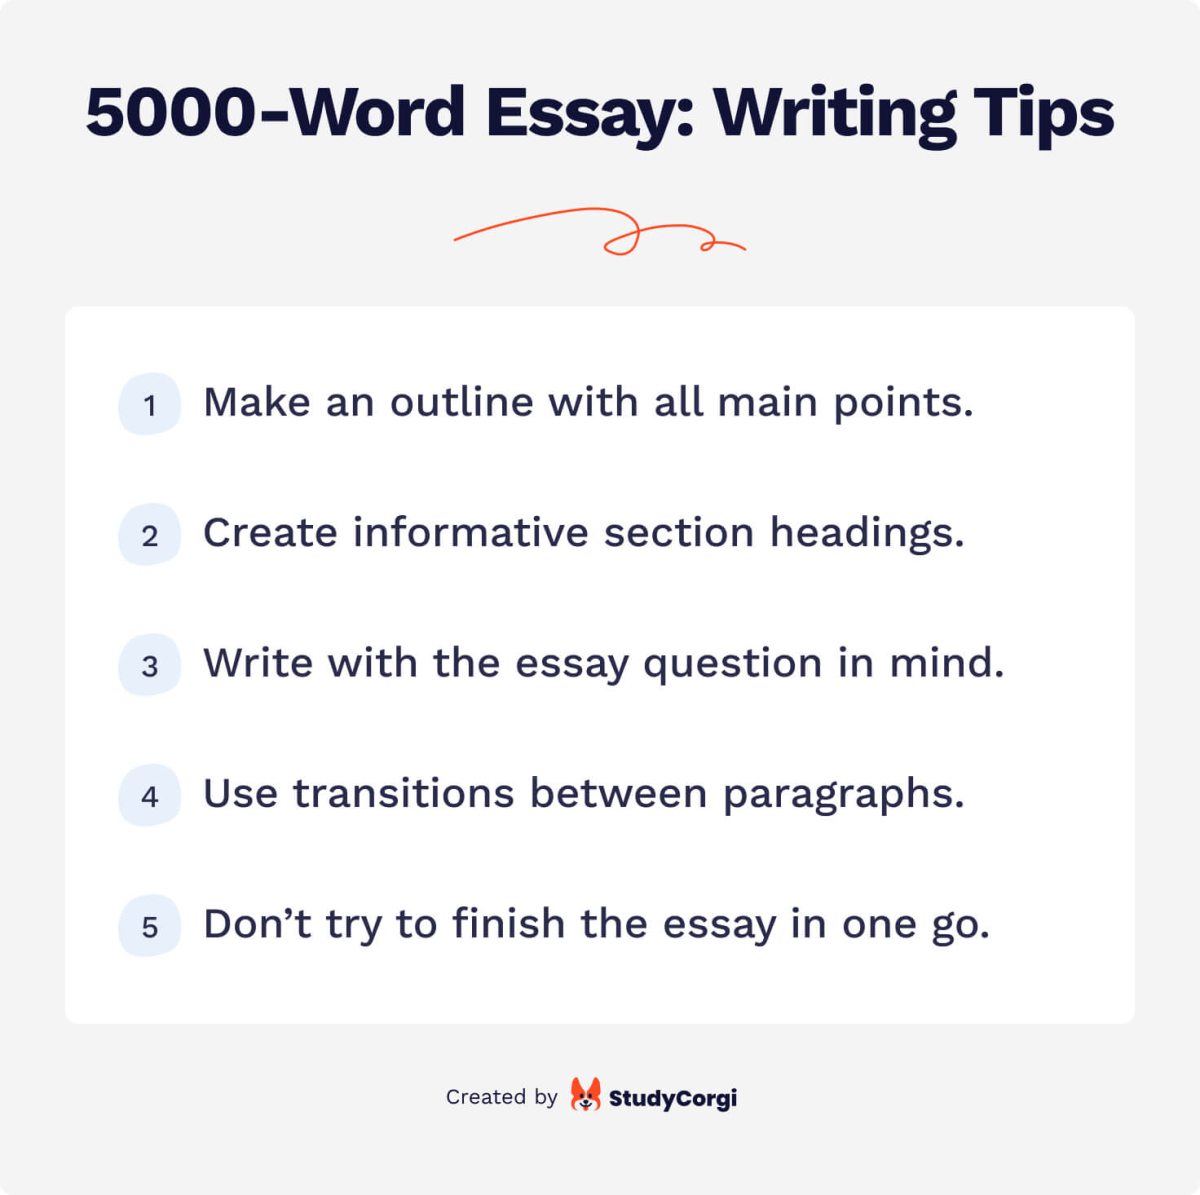 This image shows writing tips for a 5000-word essay.